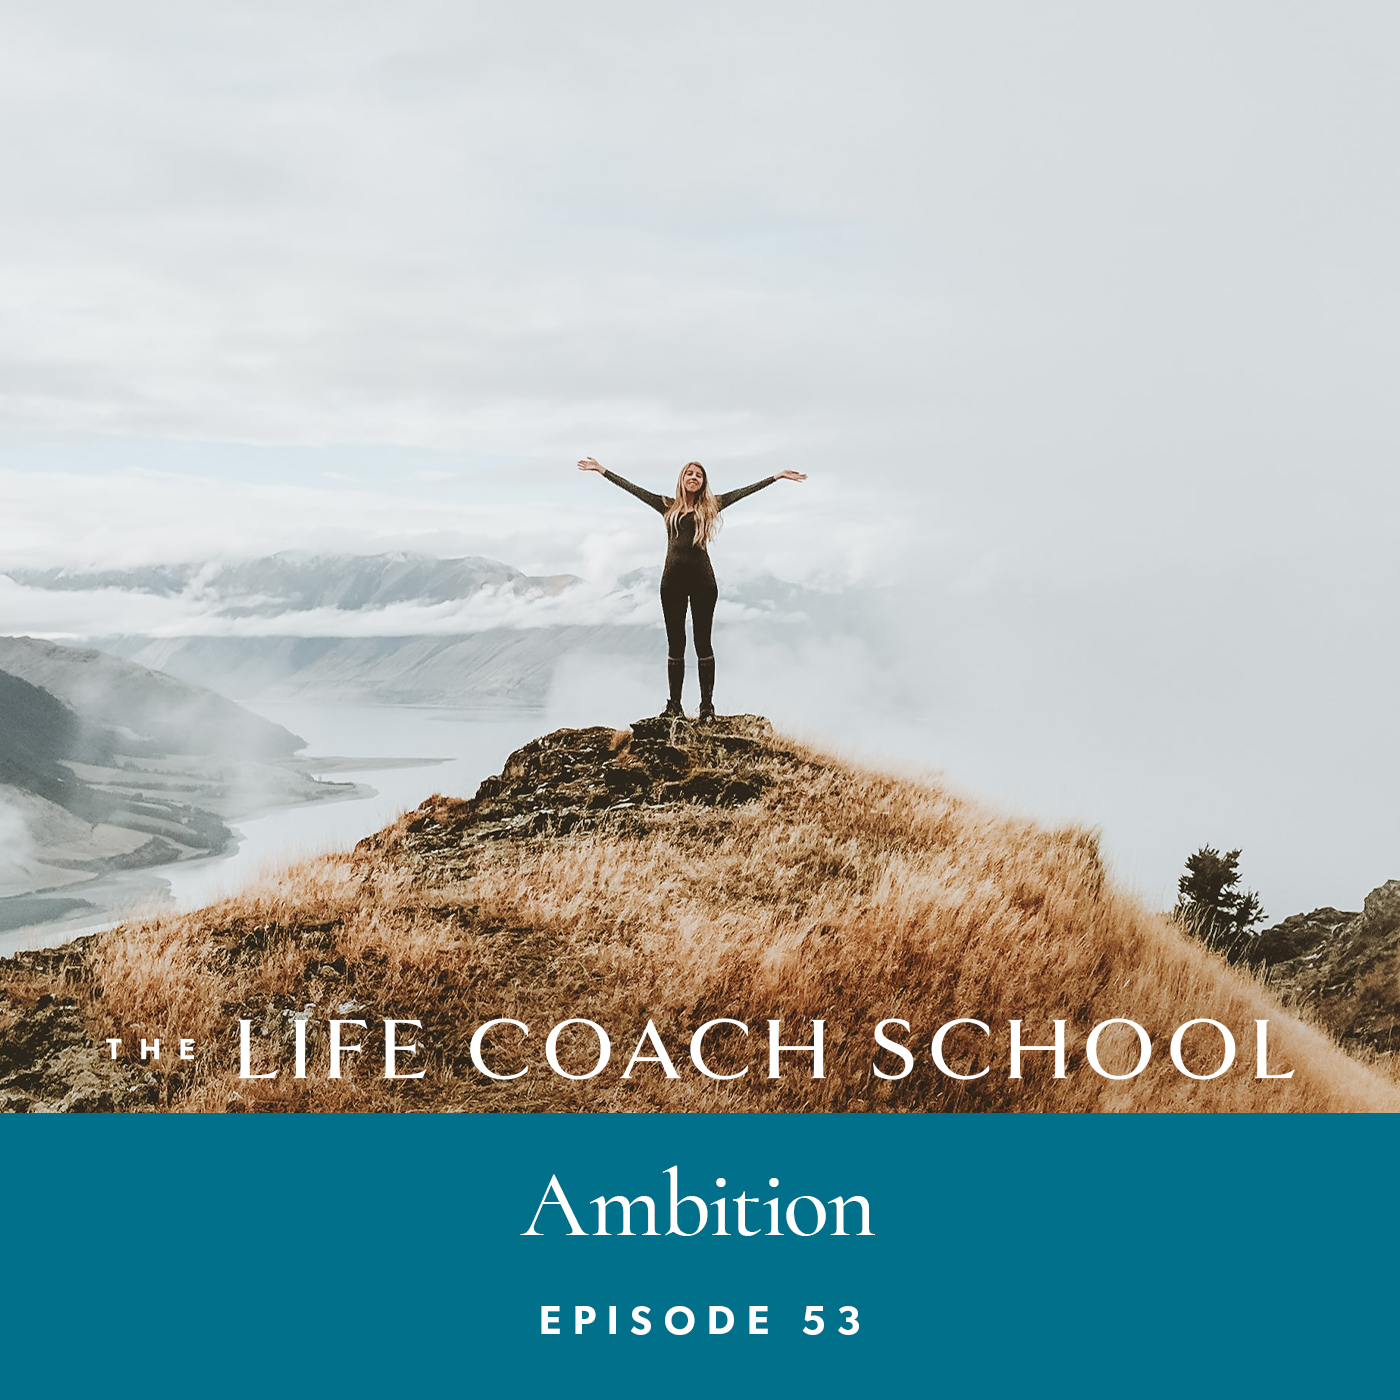 The Life Coach School Podcast with Brooke Castillo | Episode 53 | Ambition